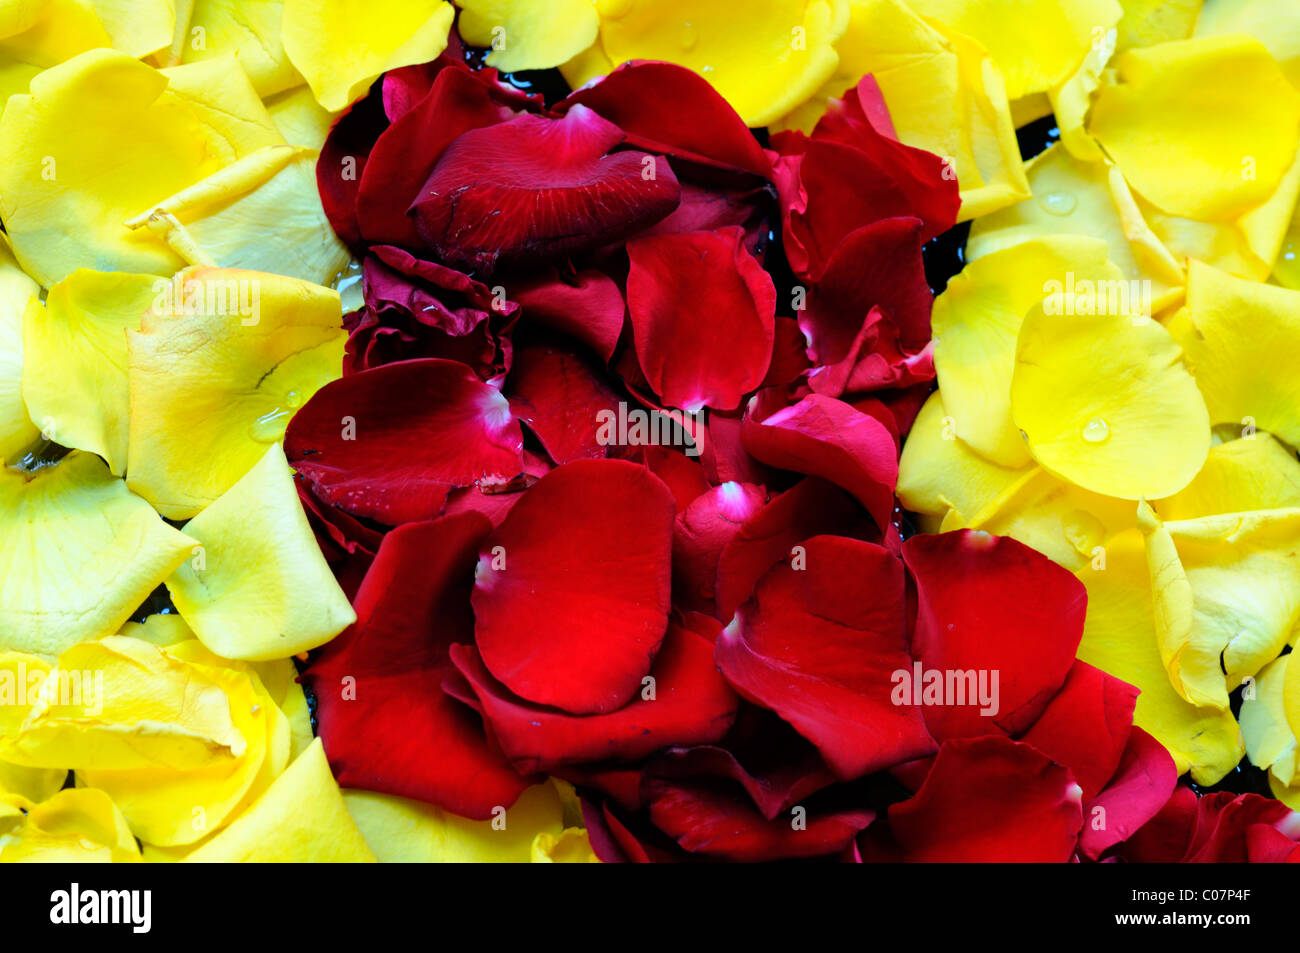 red and yellow rose petals decorate decoration decorating Stock Photo